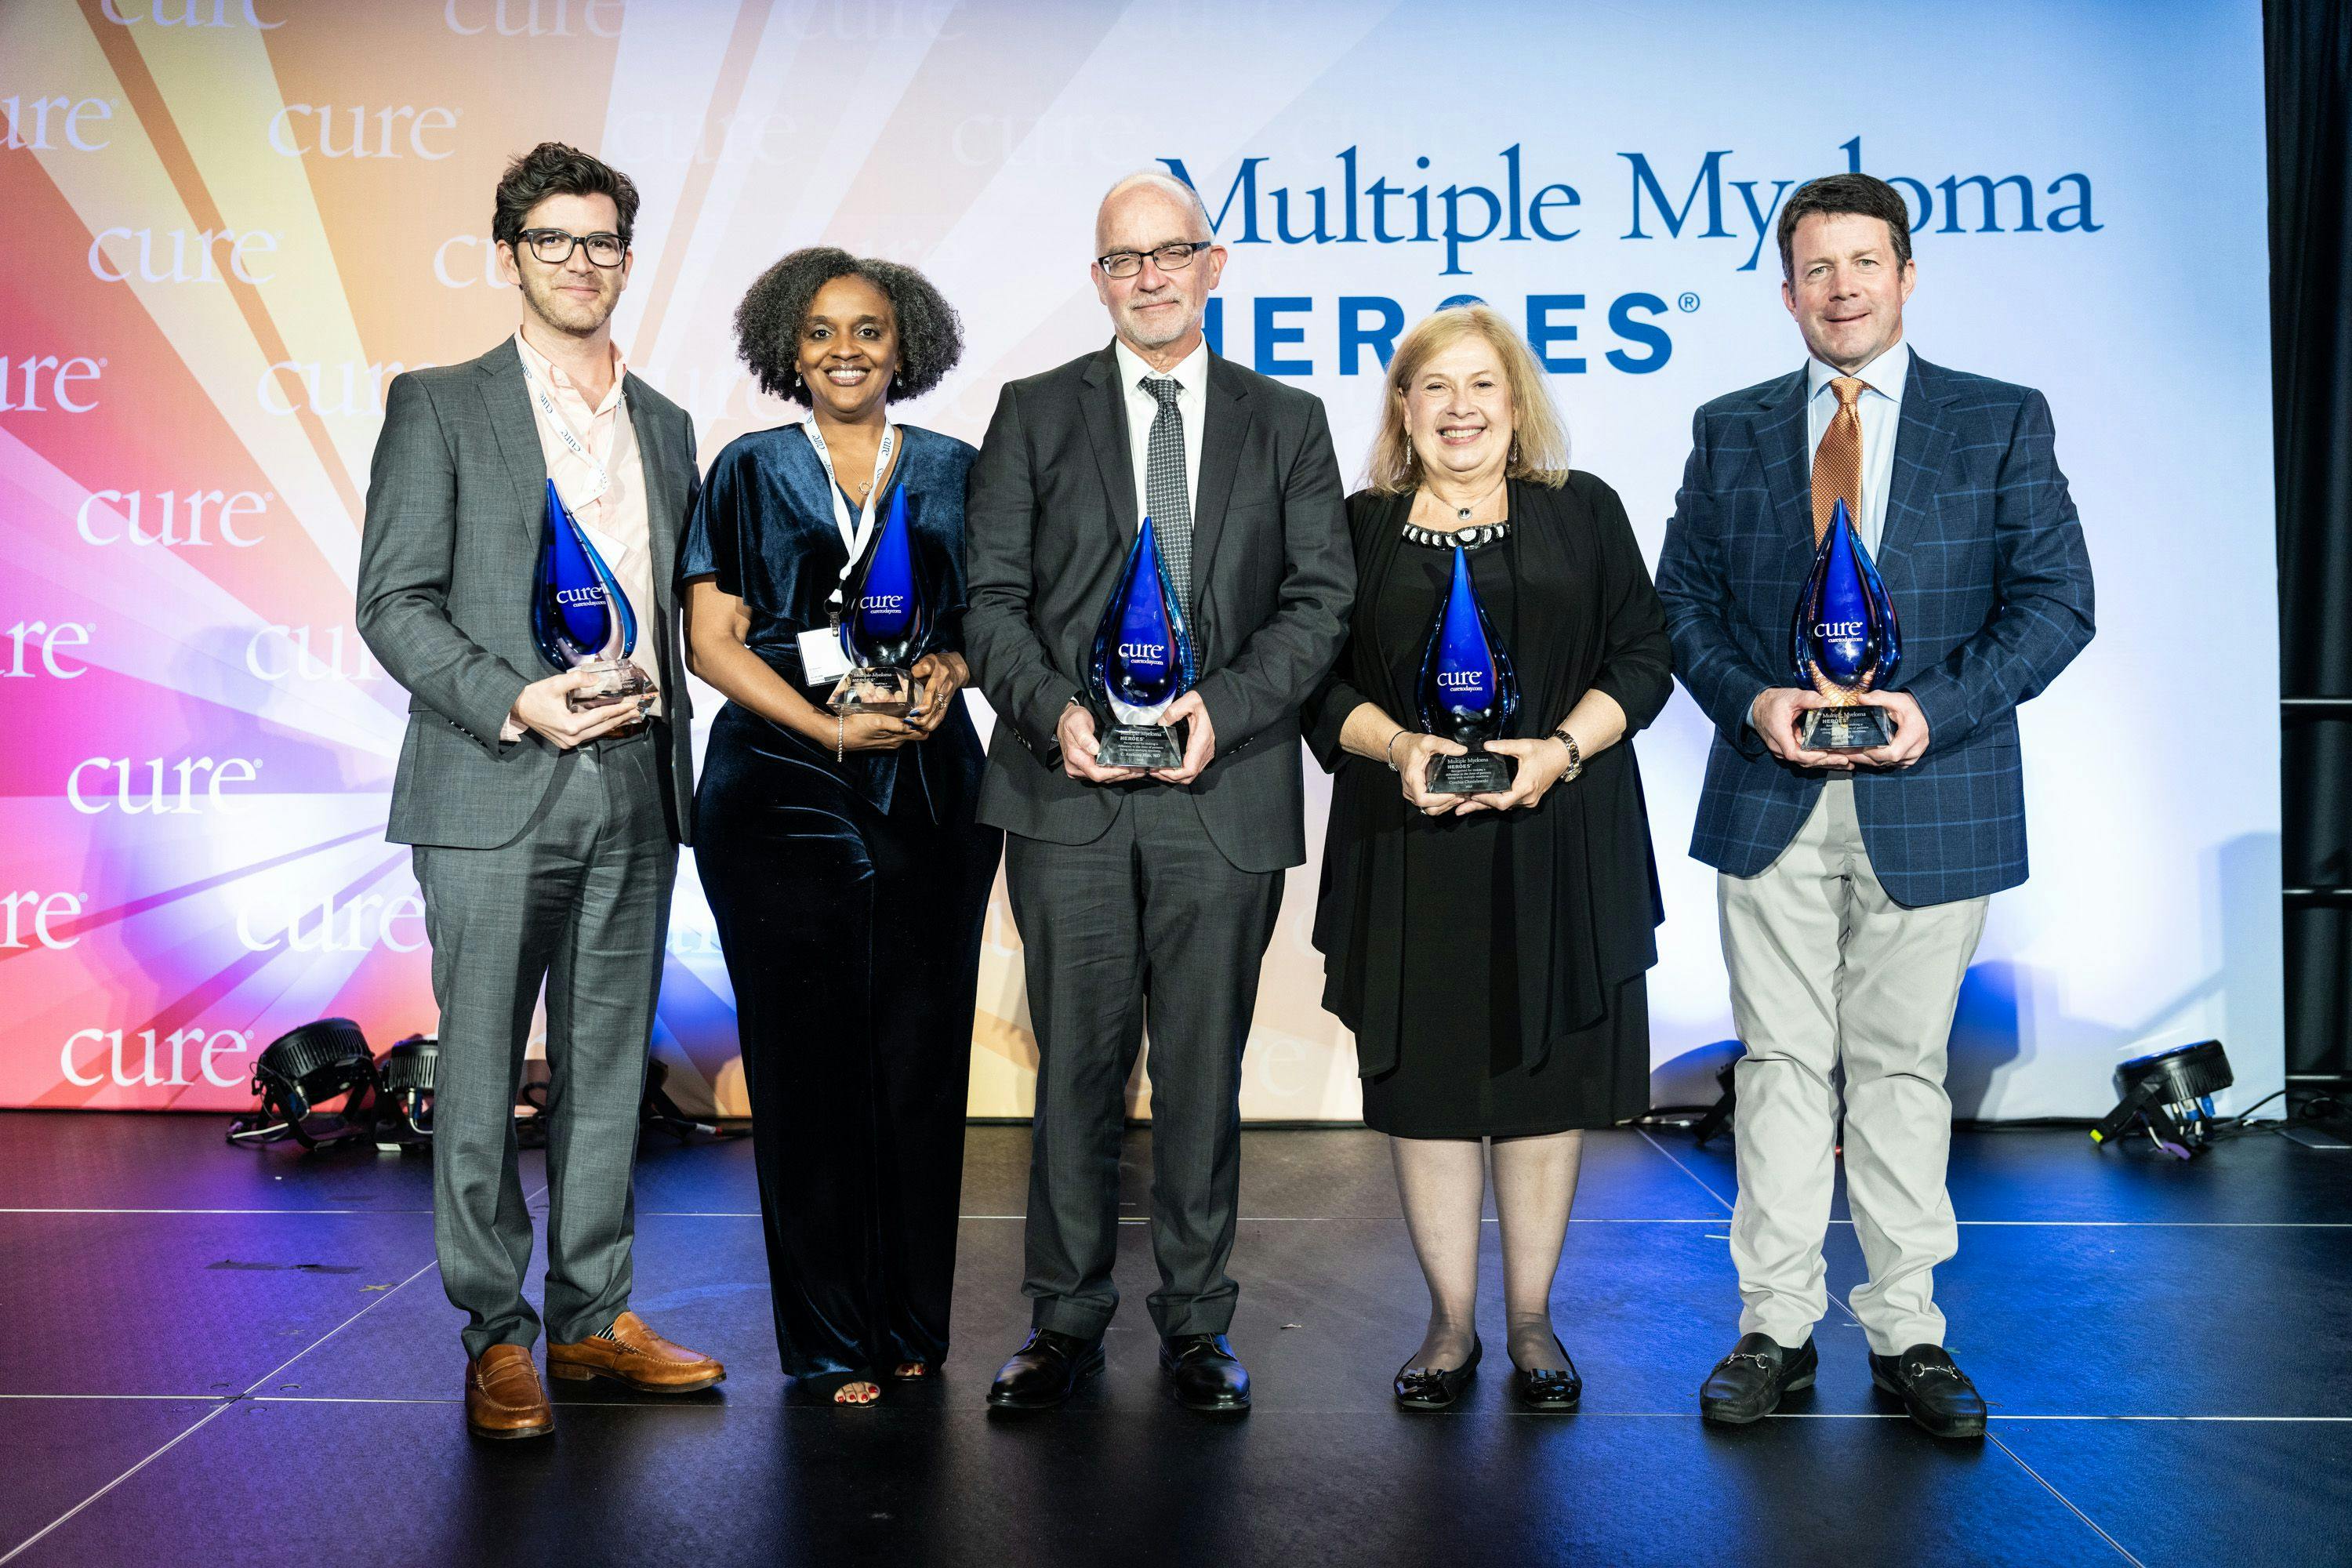 Five individuals were honored at CURE®’s Multiple Myeloma Heroes® for their contributions to the myeloma space.   From left: Dr. Cesar Rodriguez Valdes, Tiffany Williams, Cynthia Chmielewski, Dr. C. Anthony Blau, J.P. Kealy